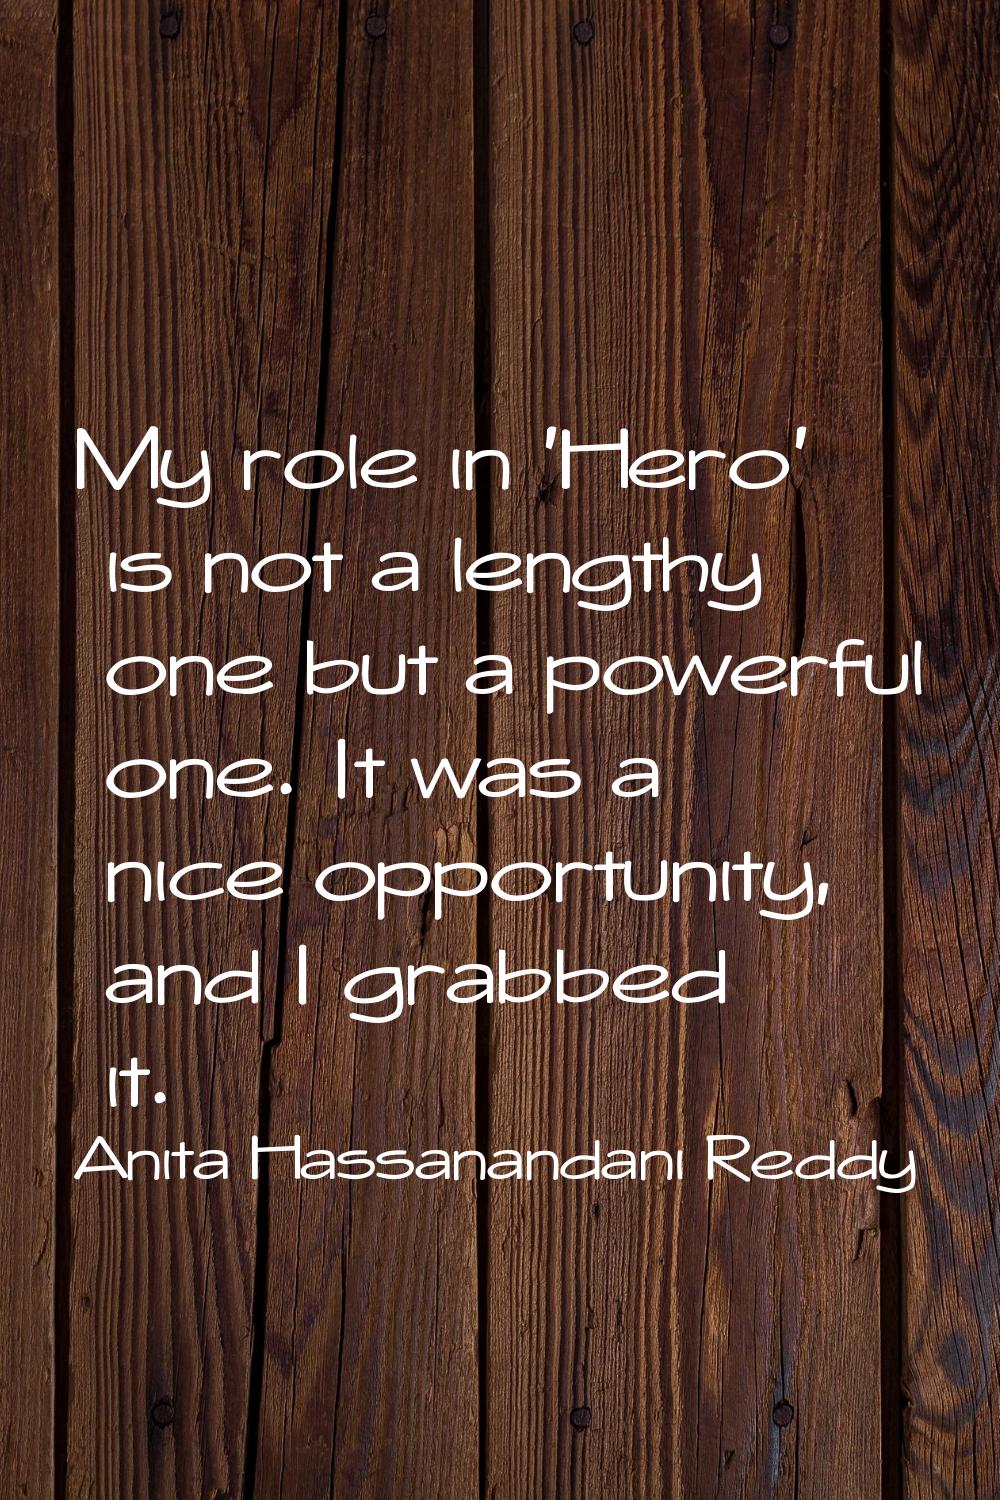 My role in 'Hero' is not a lengthy one but a powerful one. It was a nice opportunity, and I grabbed